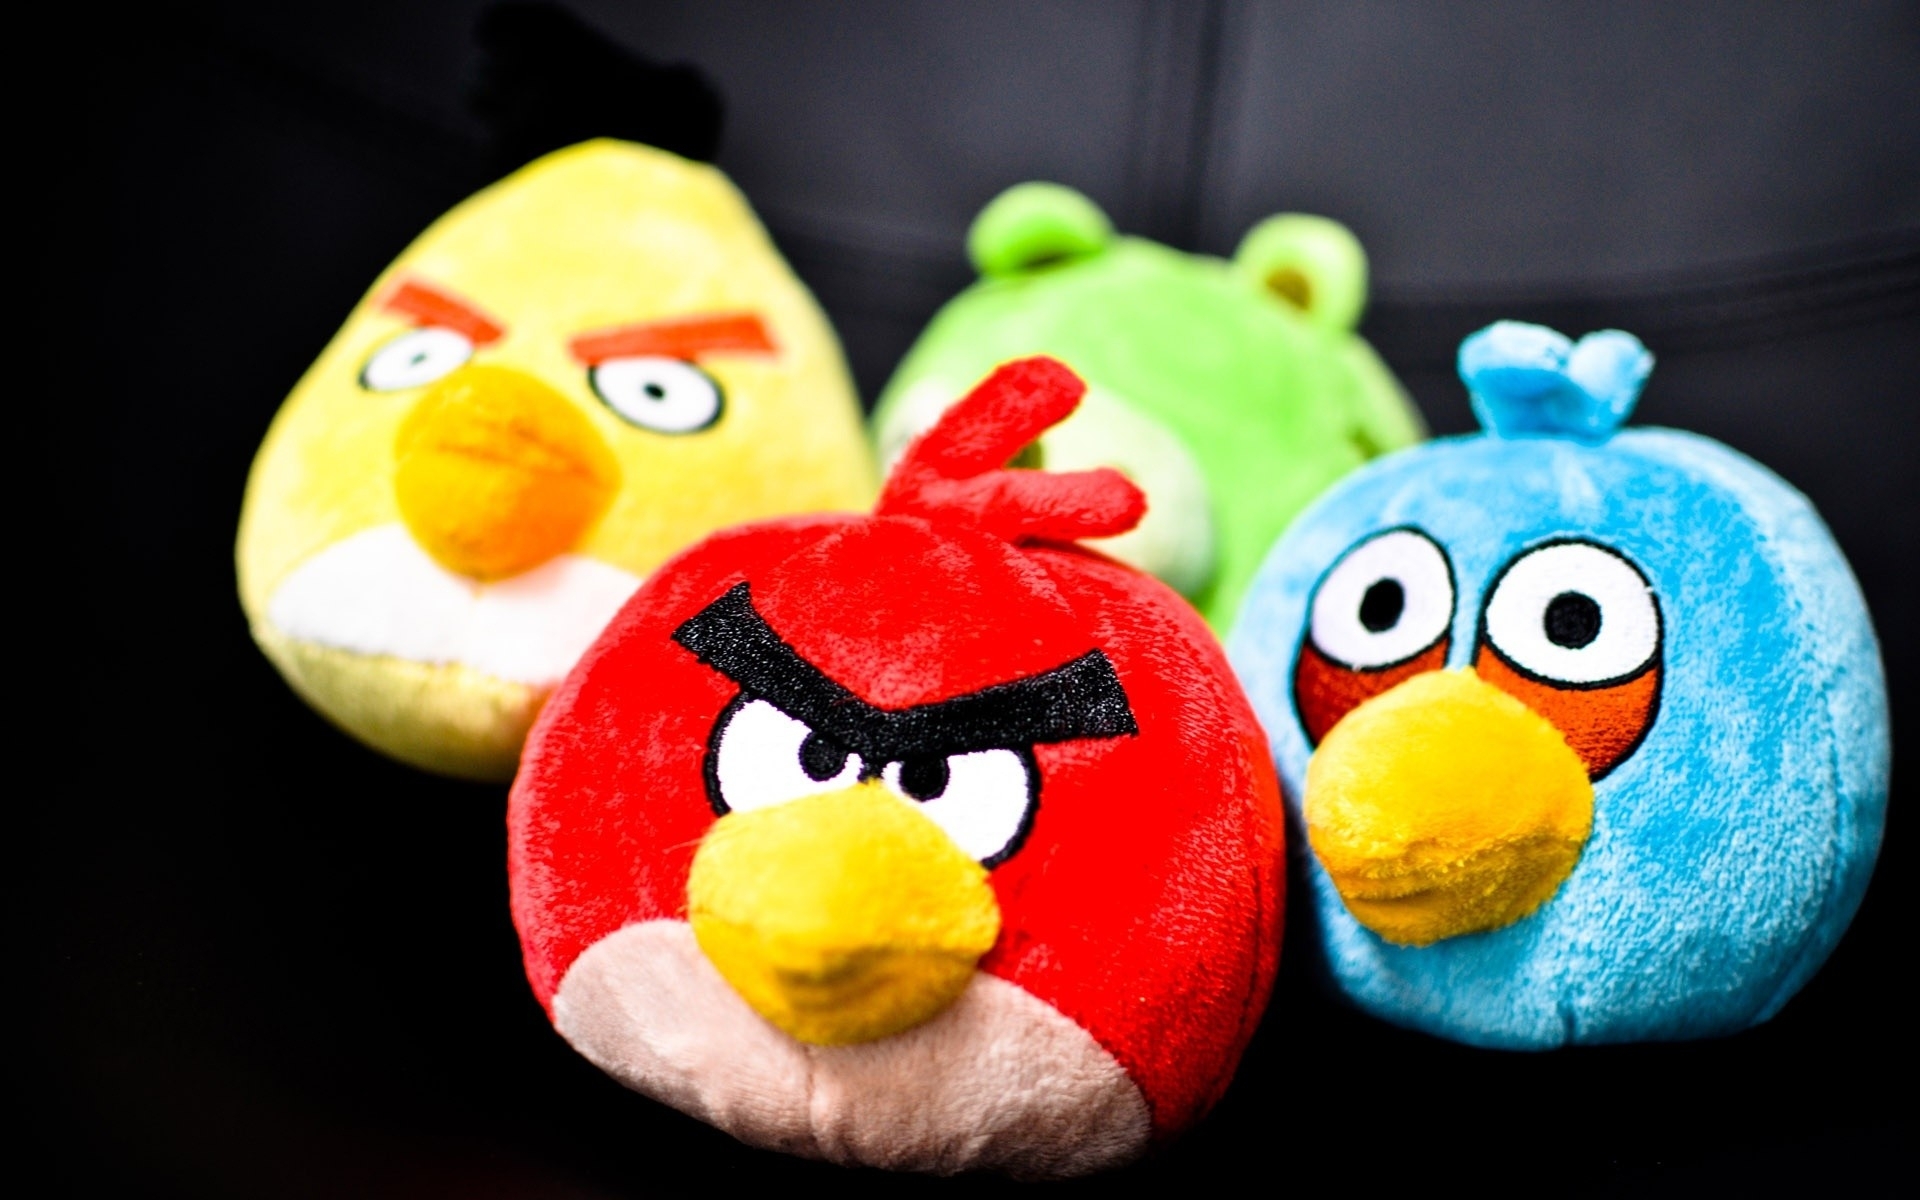 Video Game Angry Birds HD Wallpaper | Background Image